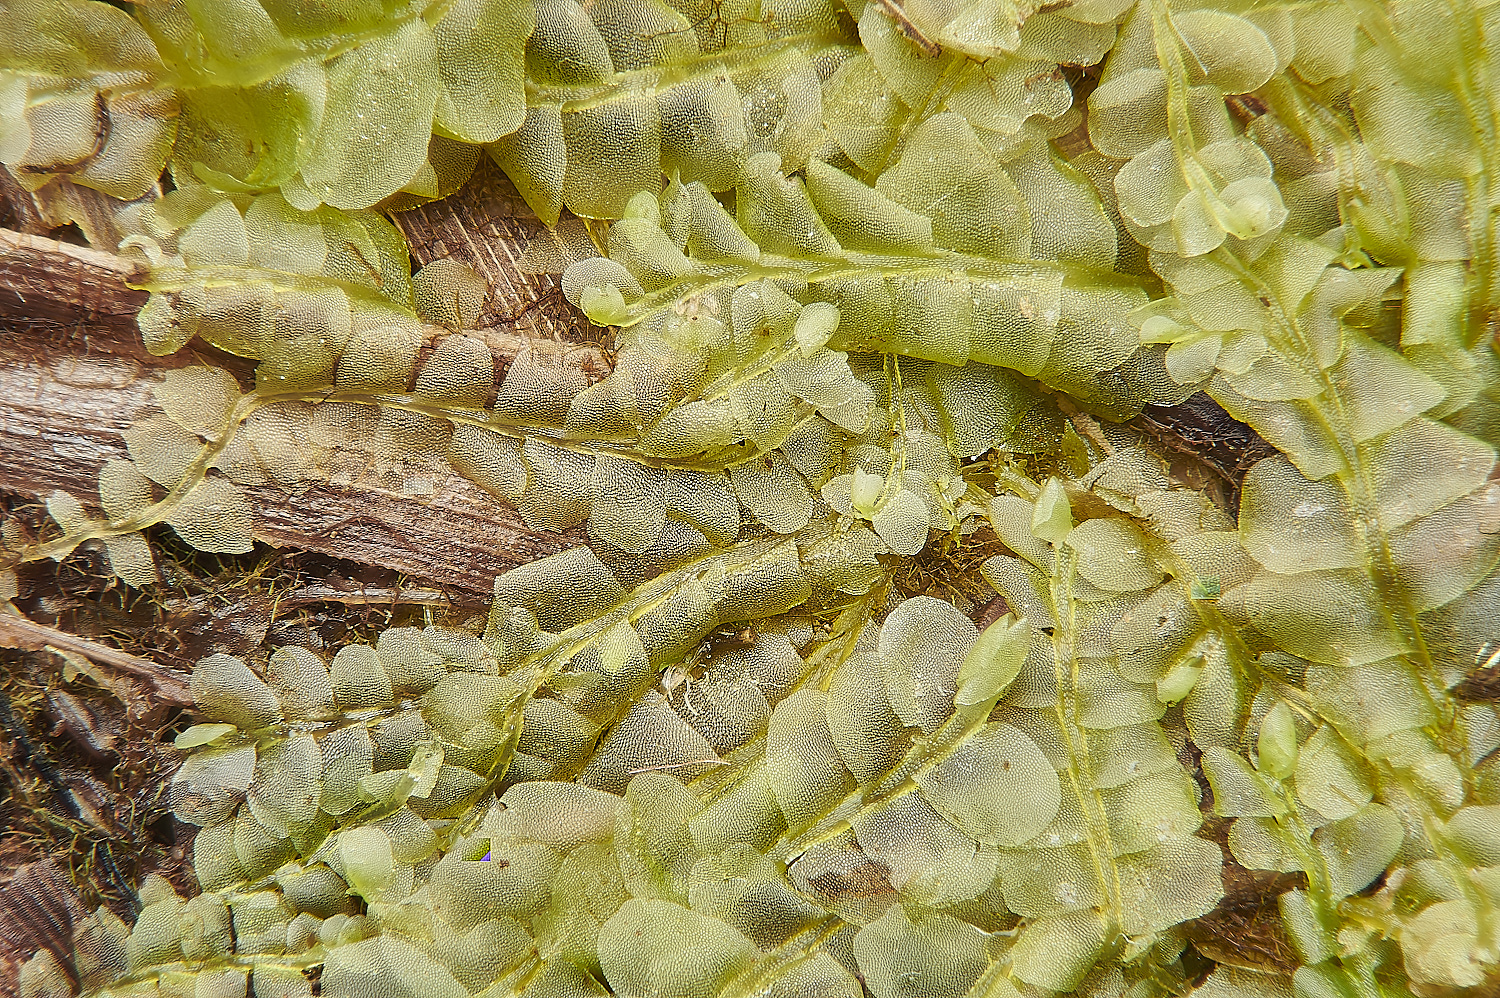 SmallburghFenCpallescens110224-1